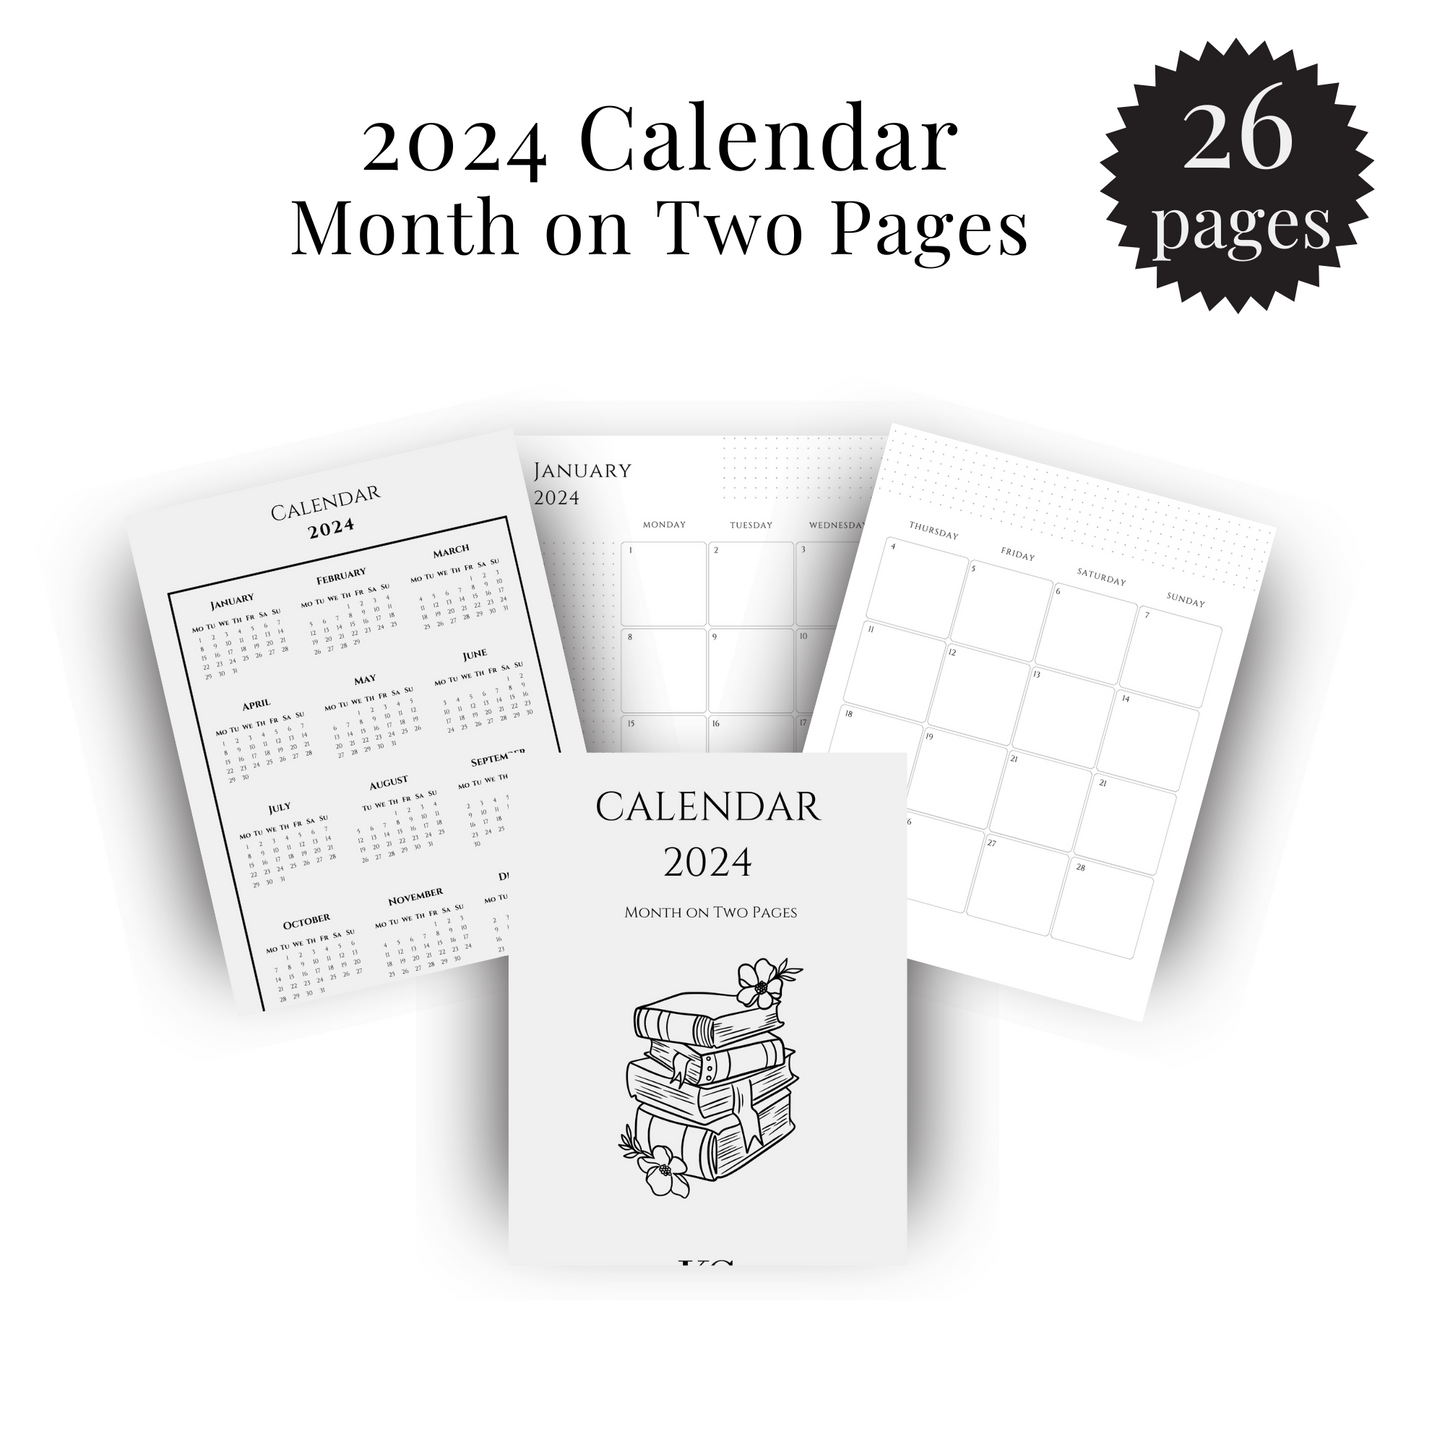 2024 Calendar Month on 2 Pages